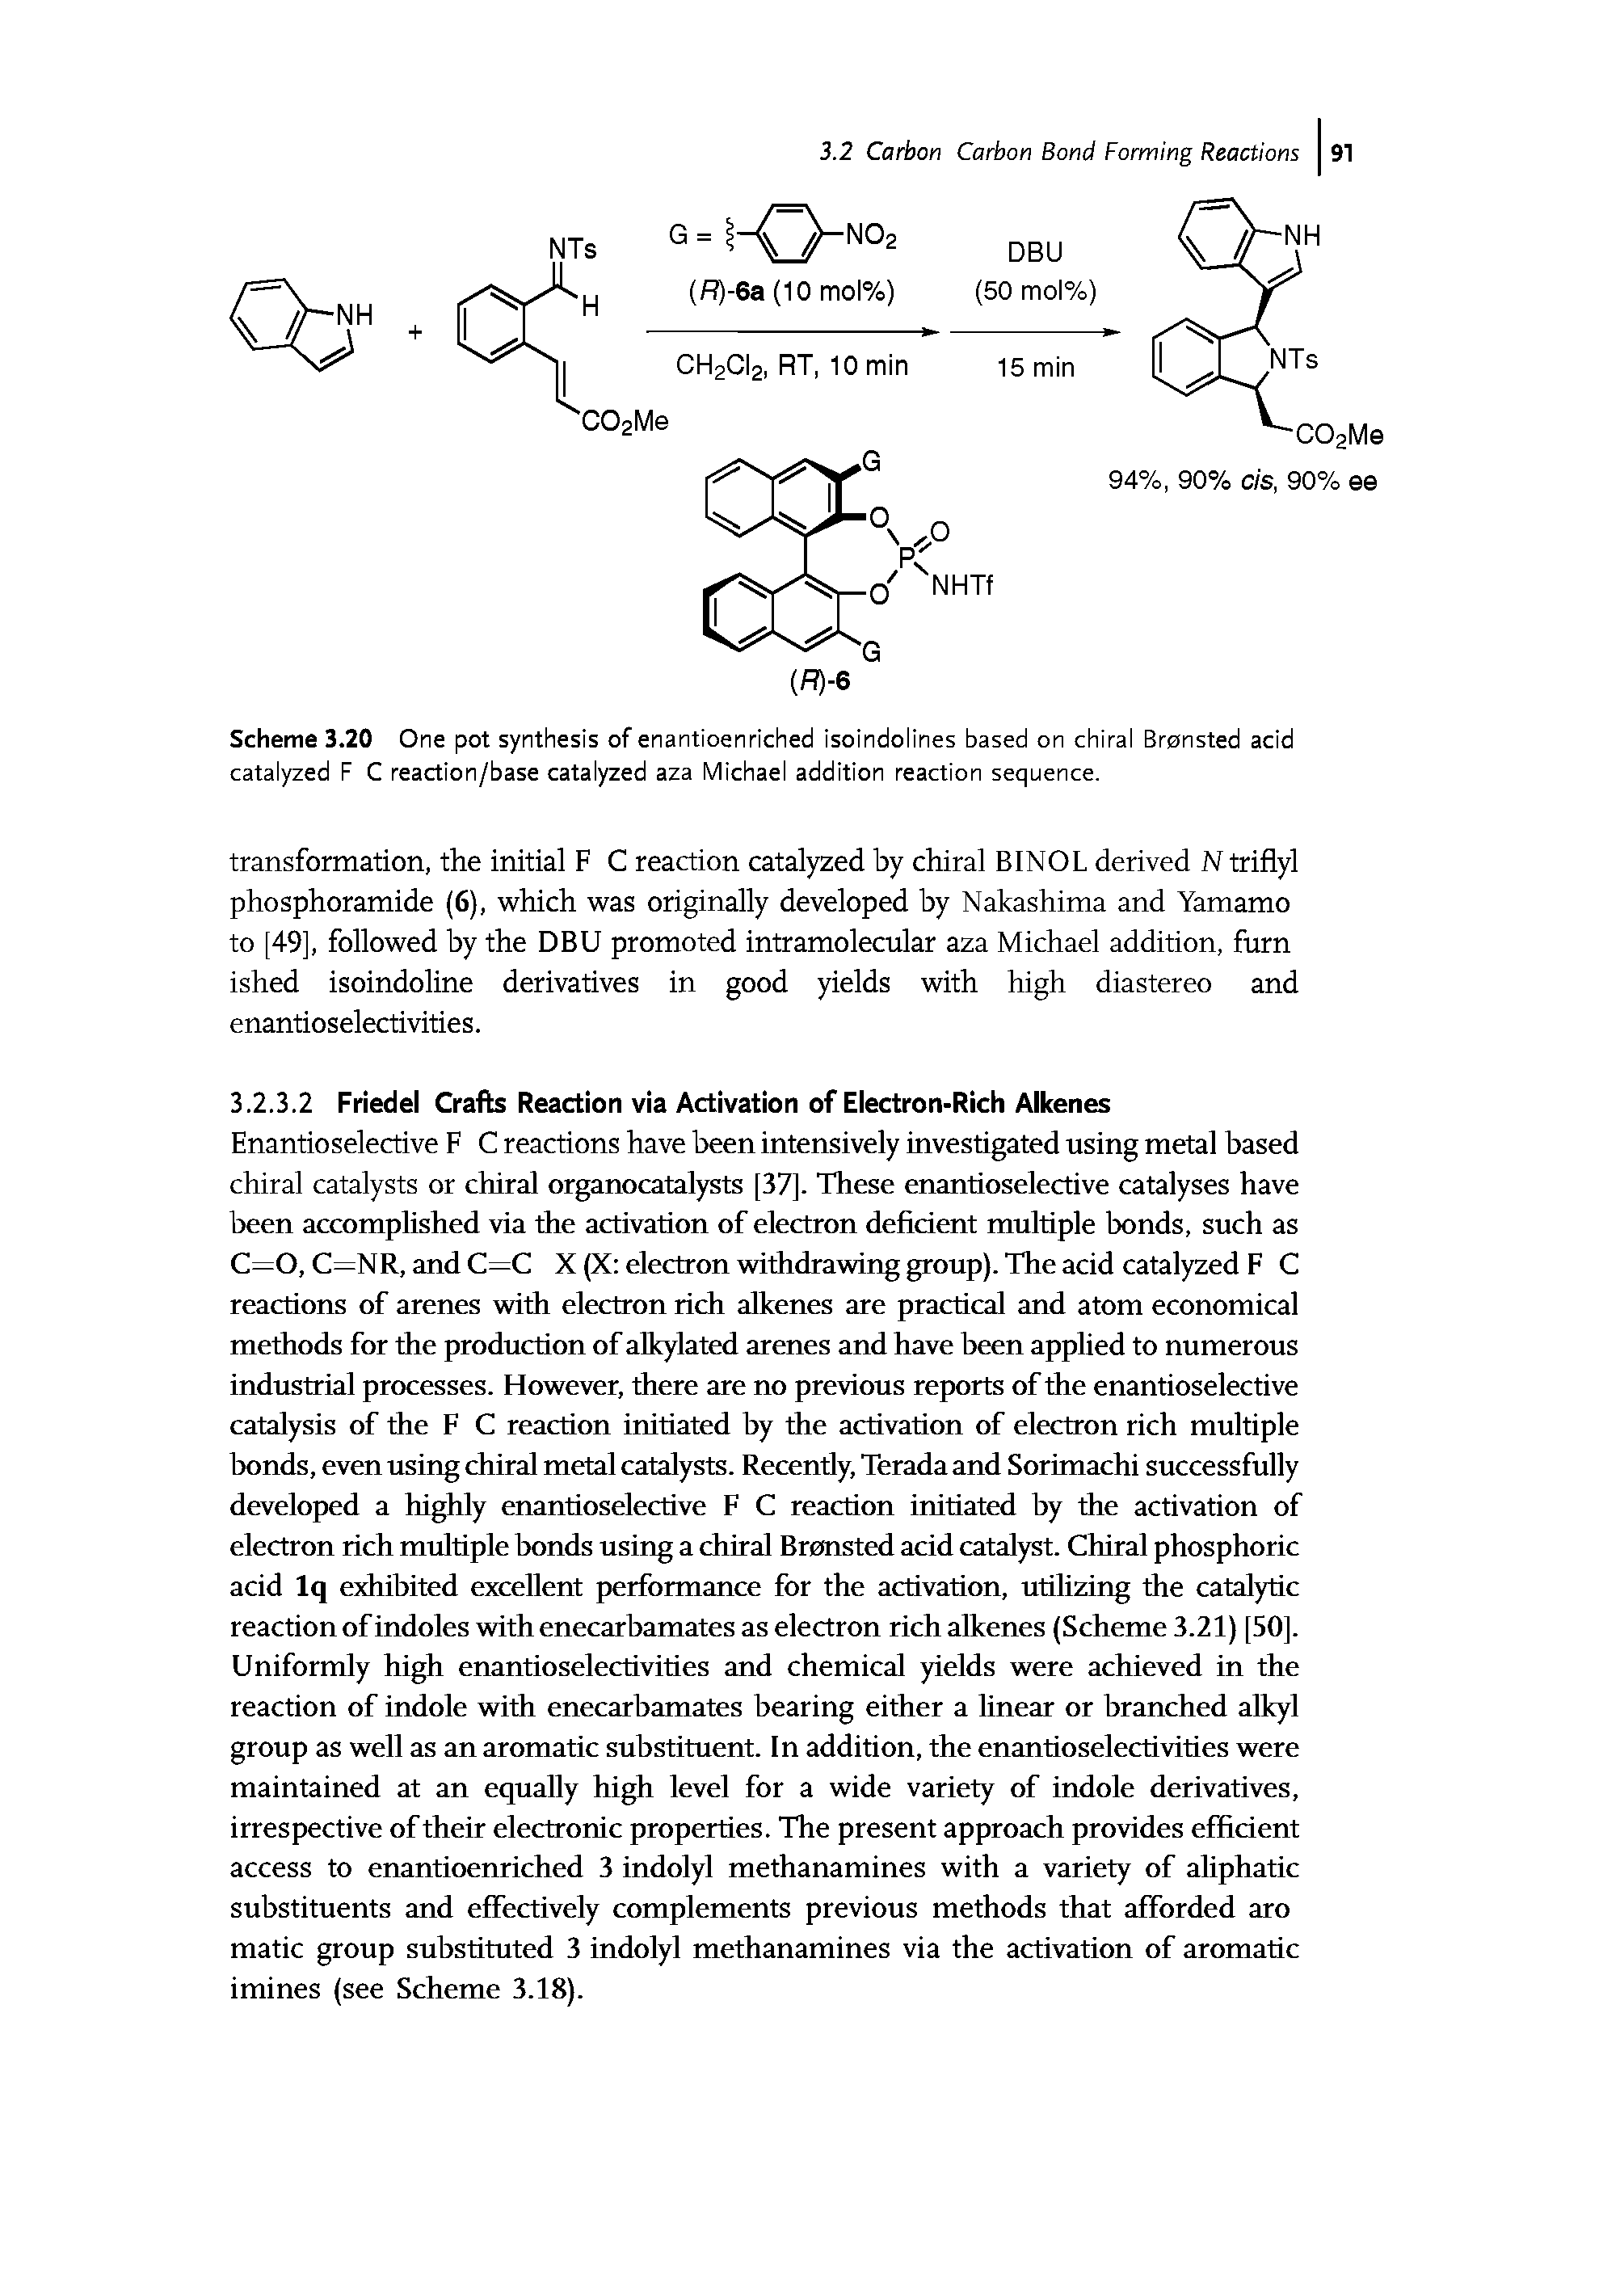 Scheme 3.20 One pot synthesis of enantioenriched isoindolines based on chiral Bronsted acid catalyzed F C reaction/base catalyzed aza Michael addition reaction sequence.